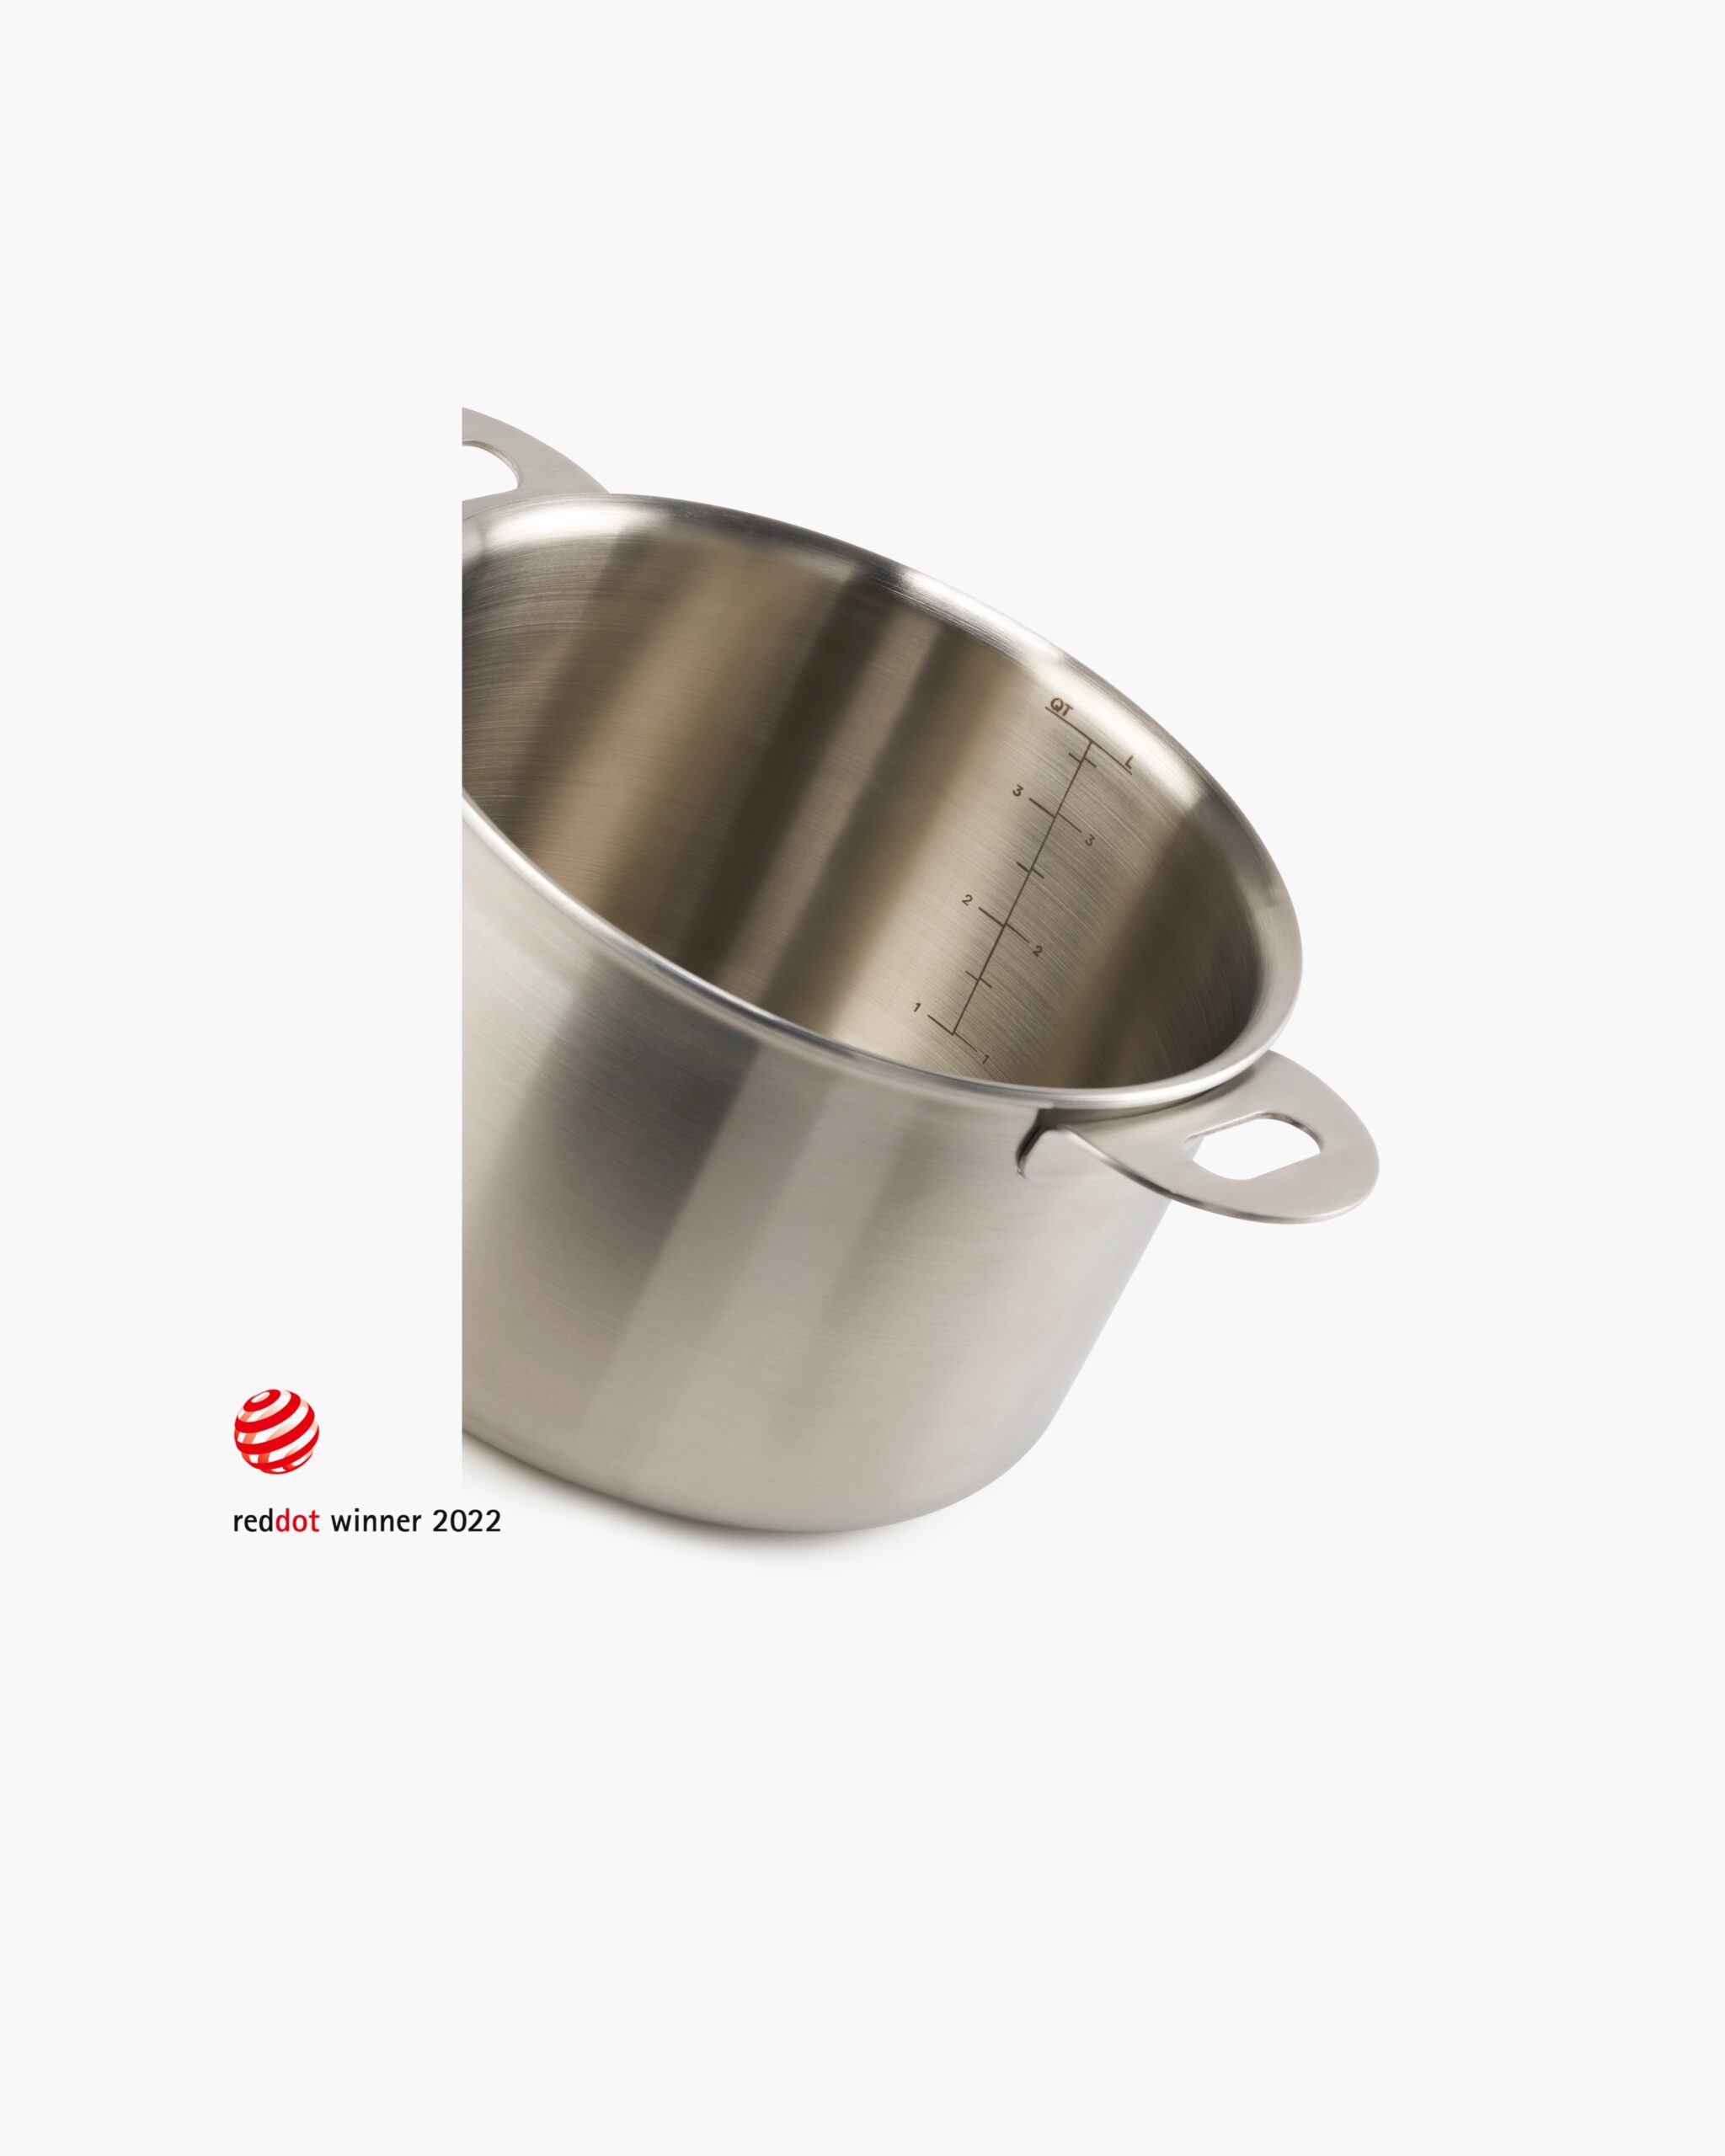 Shop ENSEMBL Stainless Steel Fully Clad Stacking Cookware with removable handles. 4 L Medium Saucepan. Multifunctional, long-lasting, design-forward home wares. Best all purpose saucepan with lid. Medium Saucepan with removable handles.